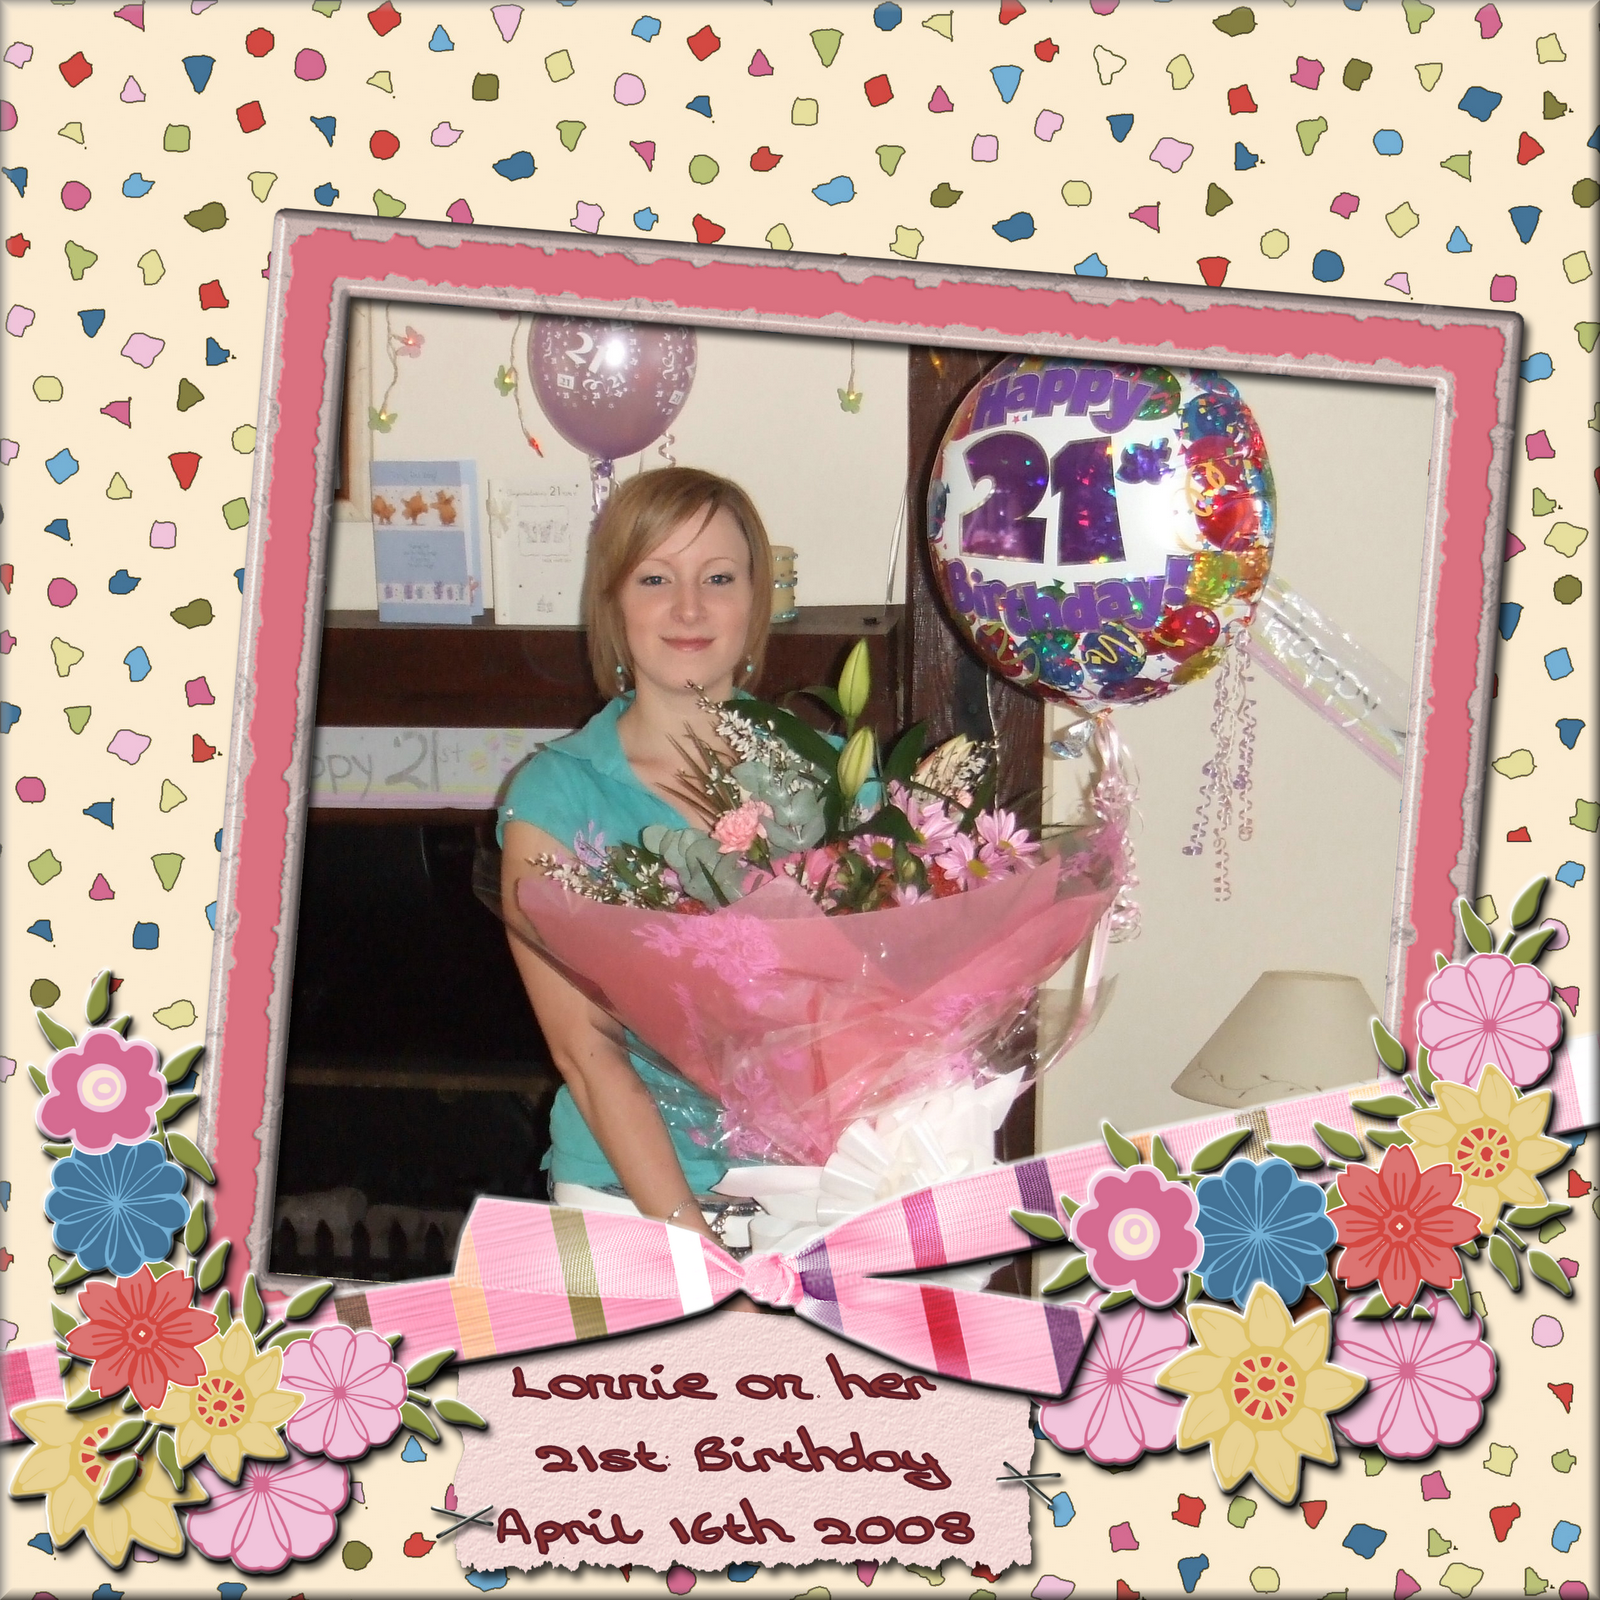 [2008+21st+B'day+flowers.png]